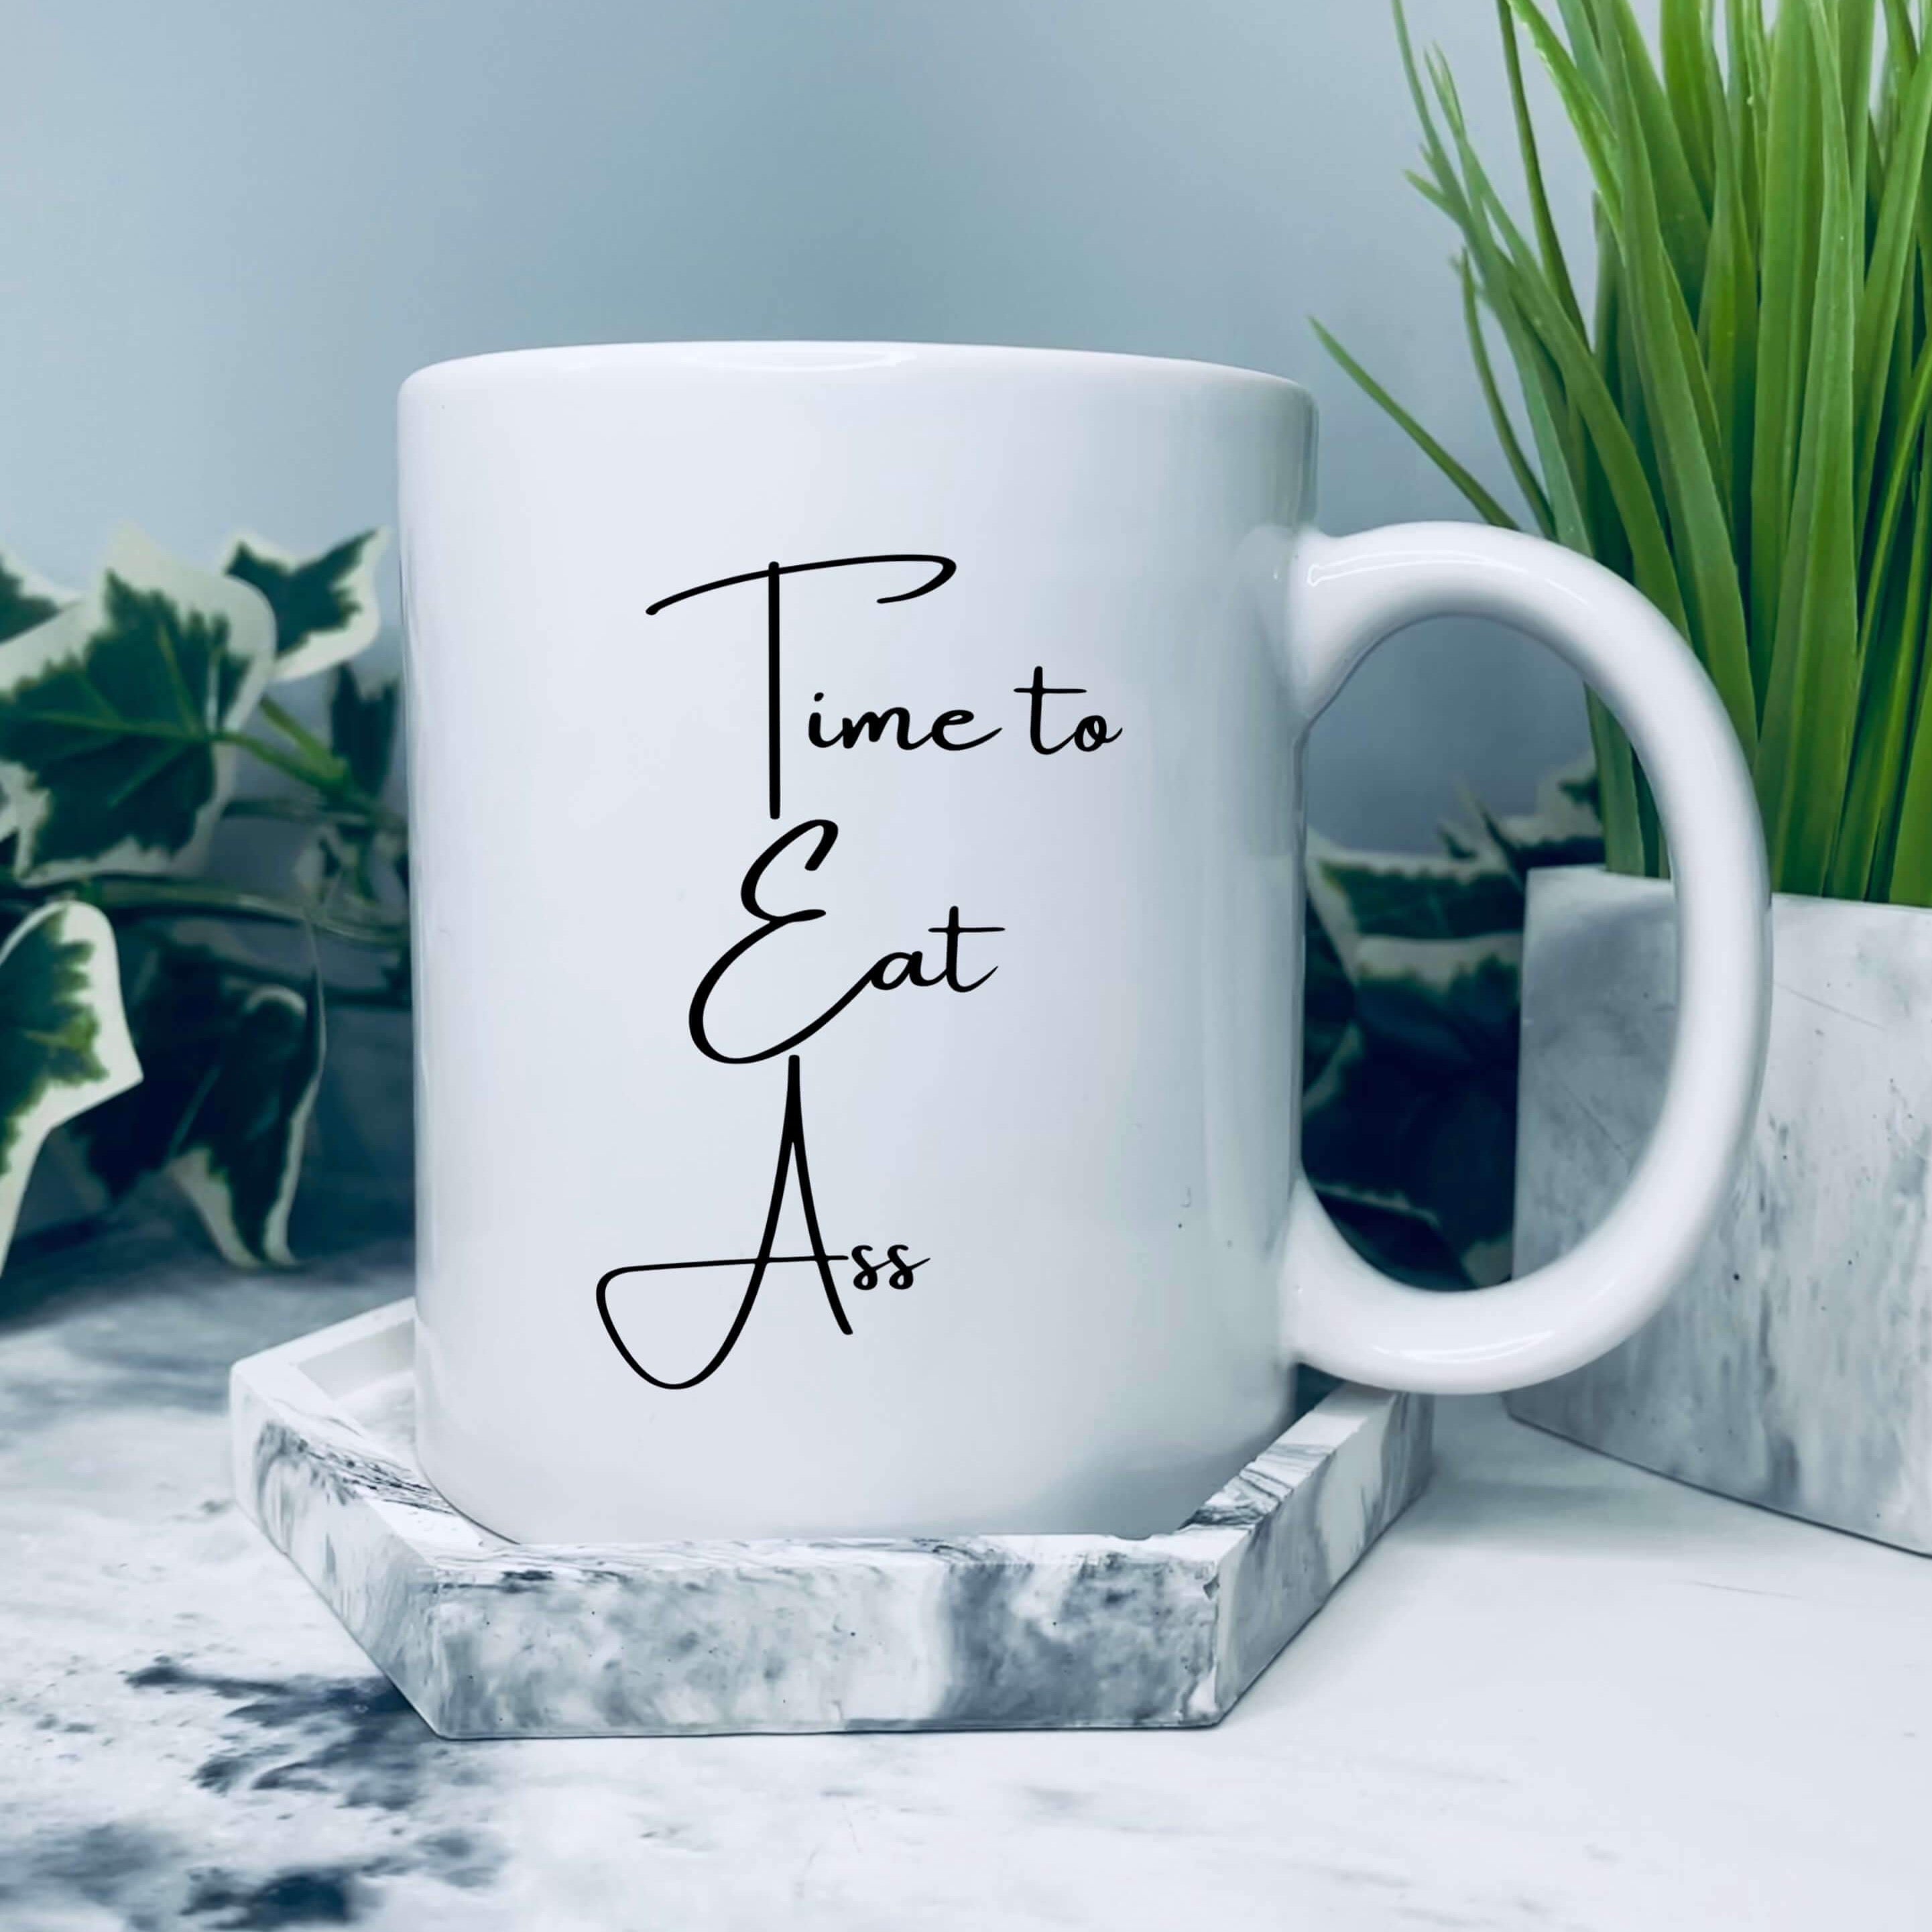 Mug that says: Time to Eat Ass. The T,E and A are capitalised and positioned above one another so the mug also reads tea.